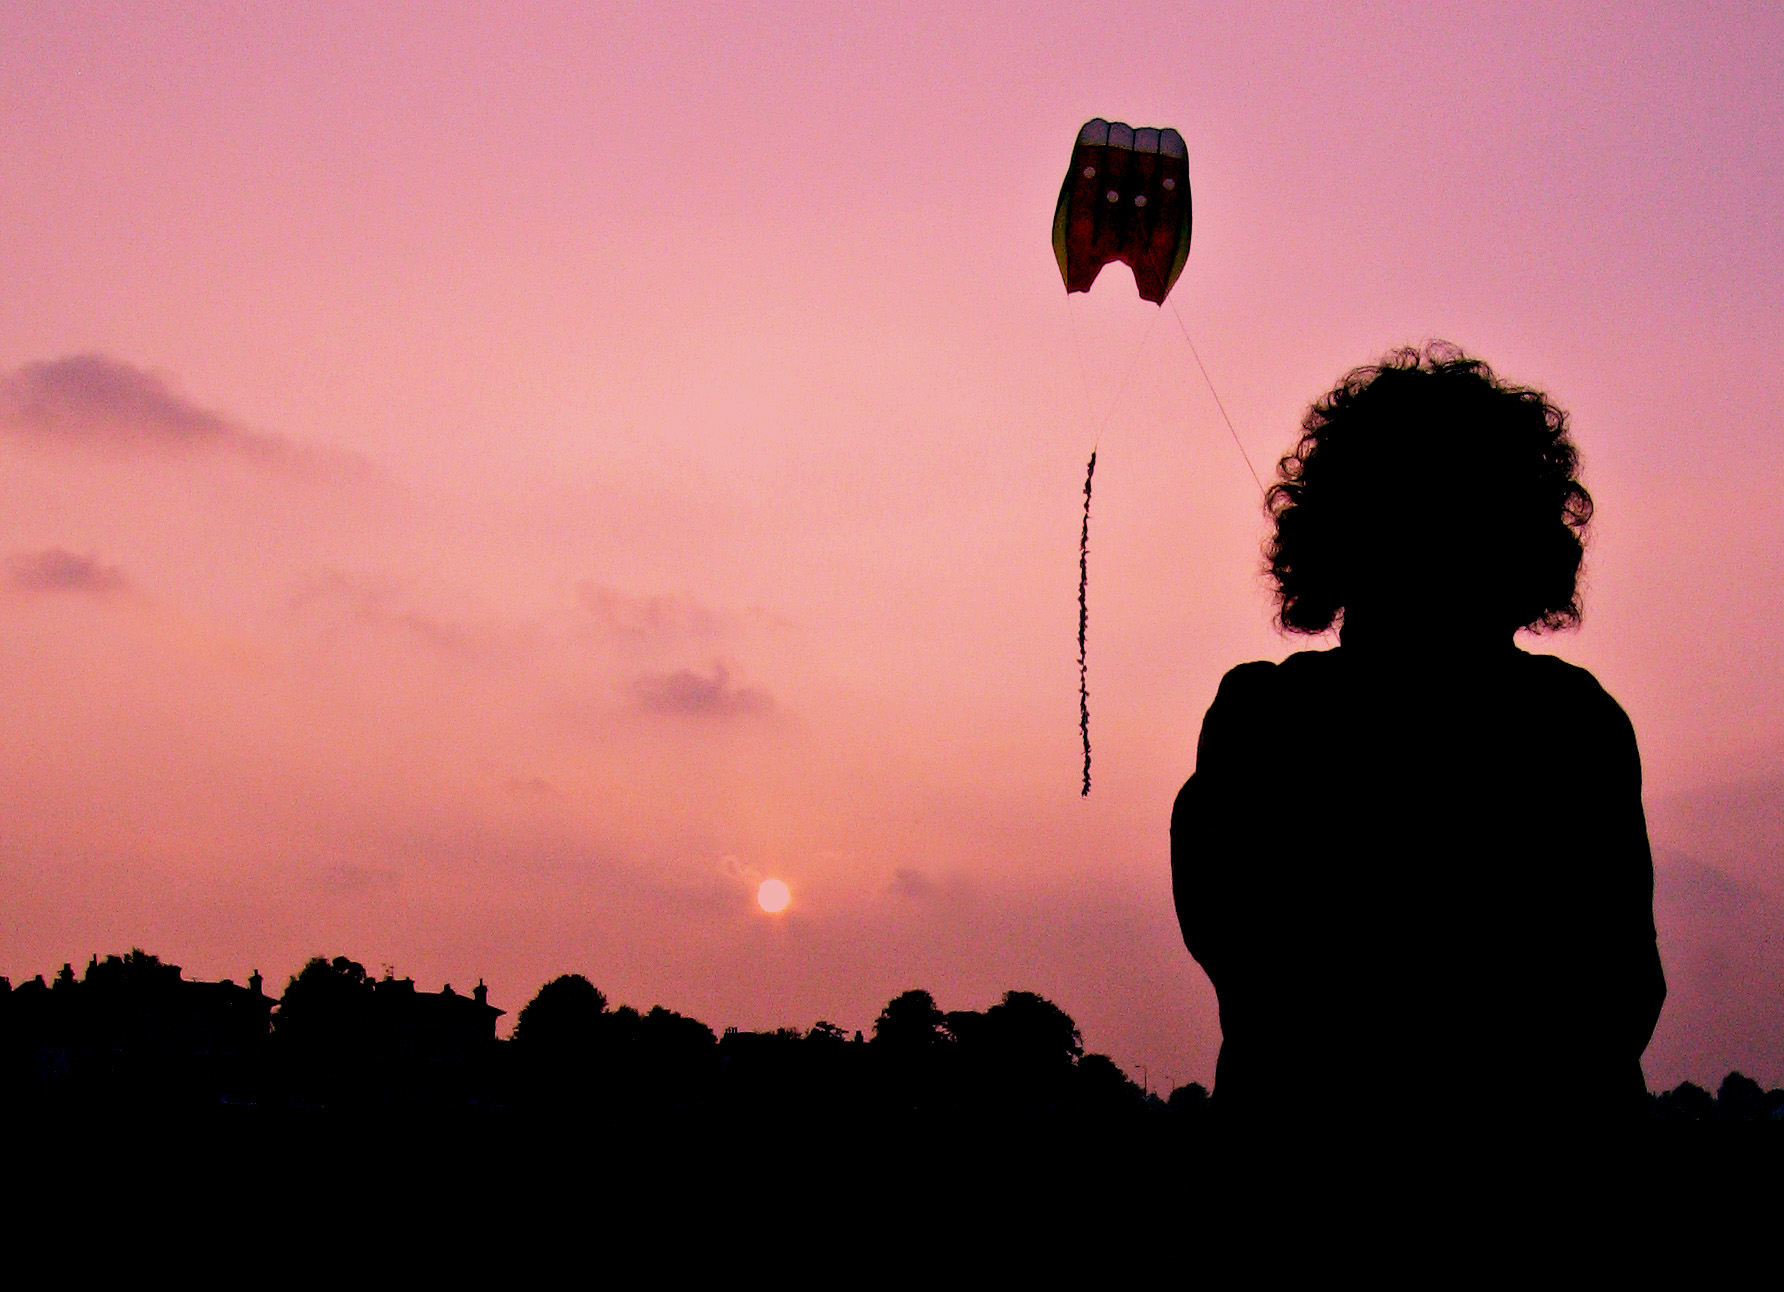 Kiting in the sunset